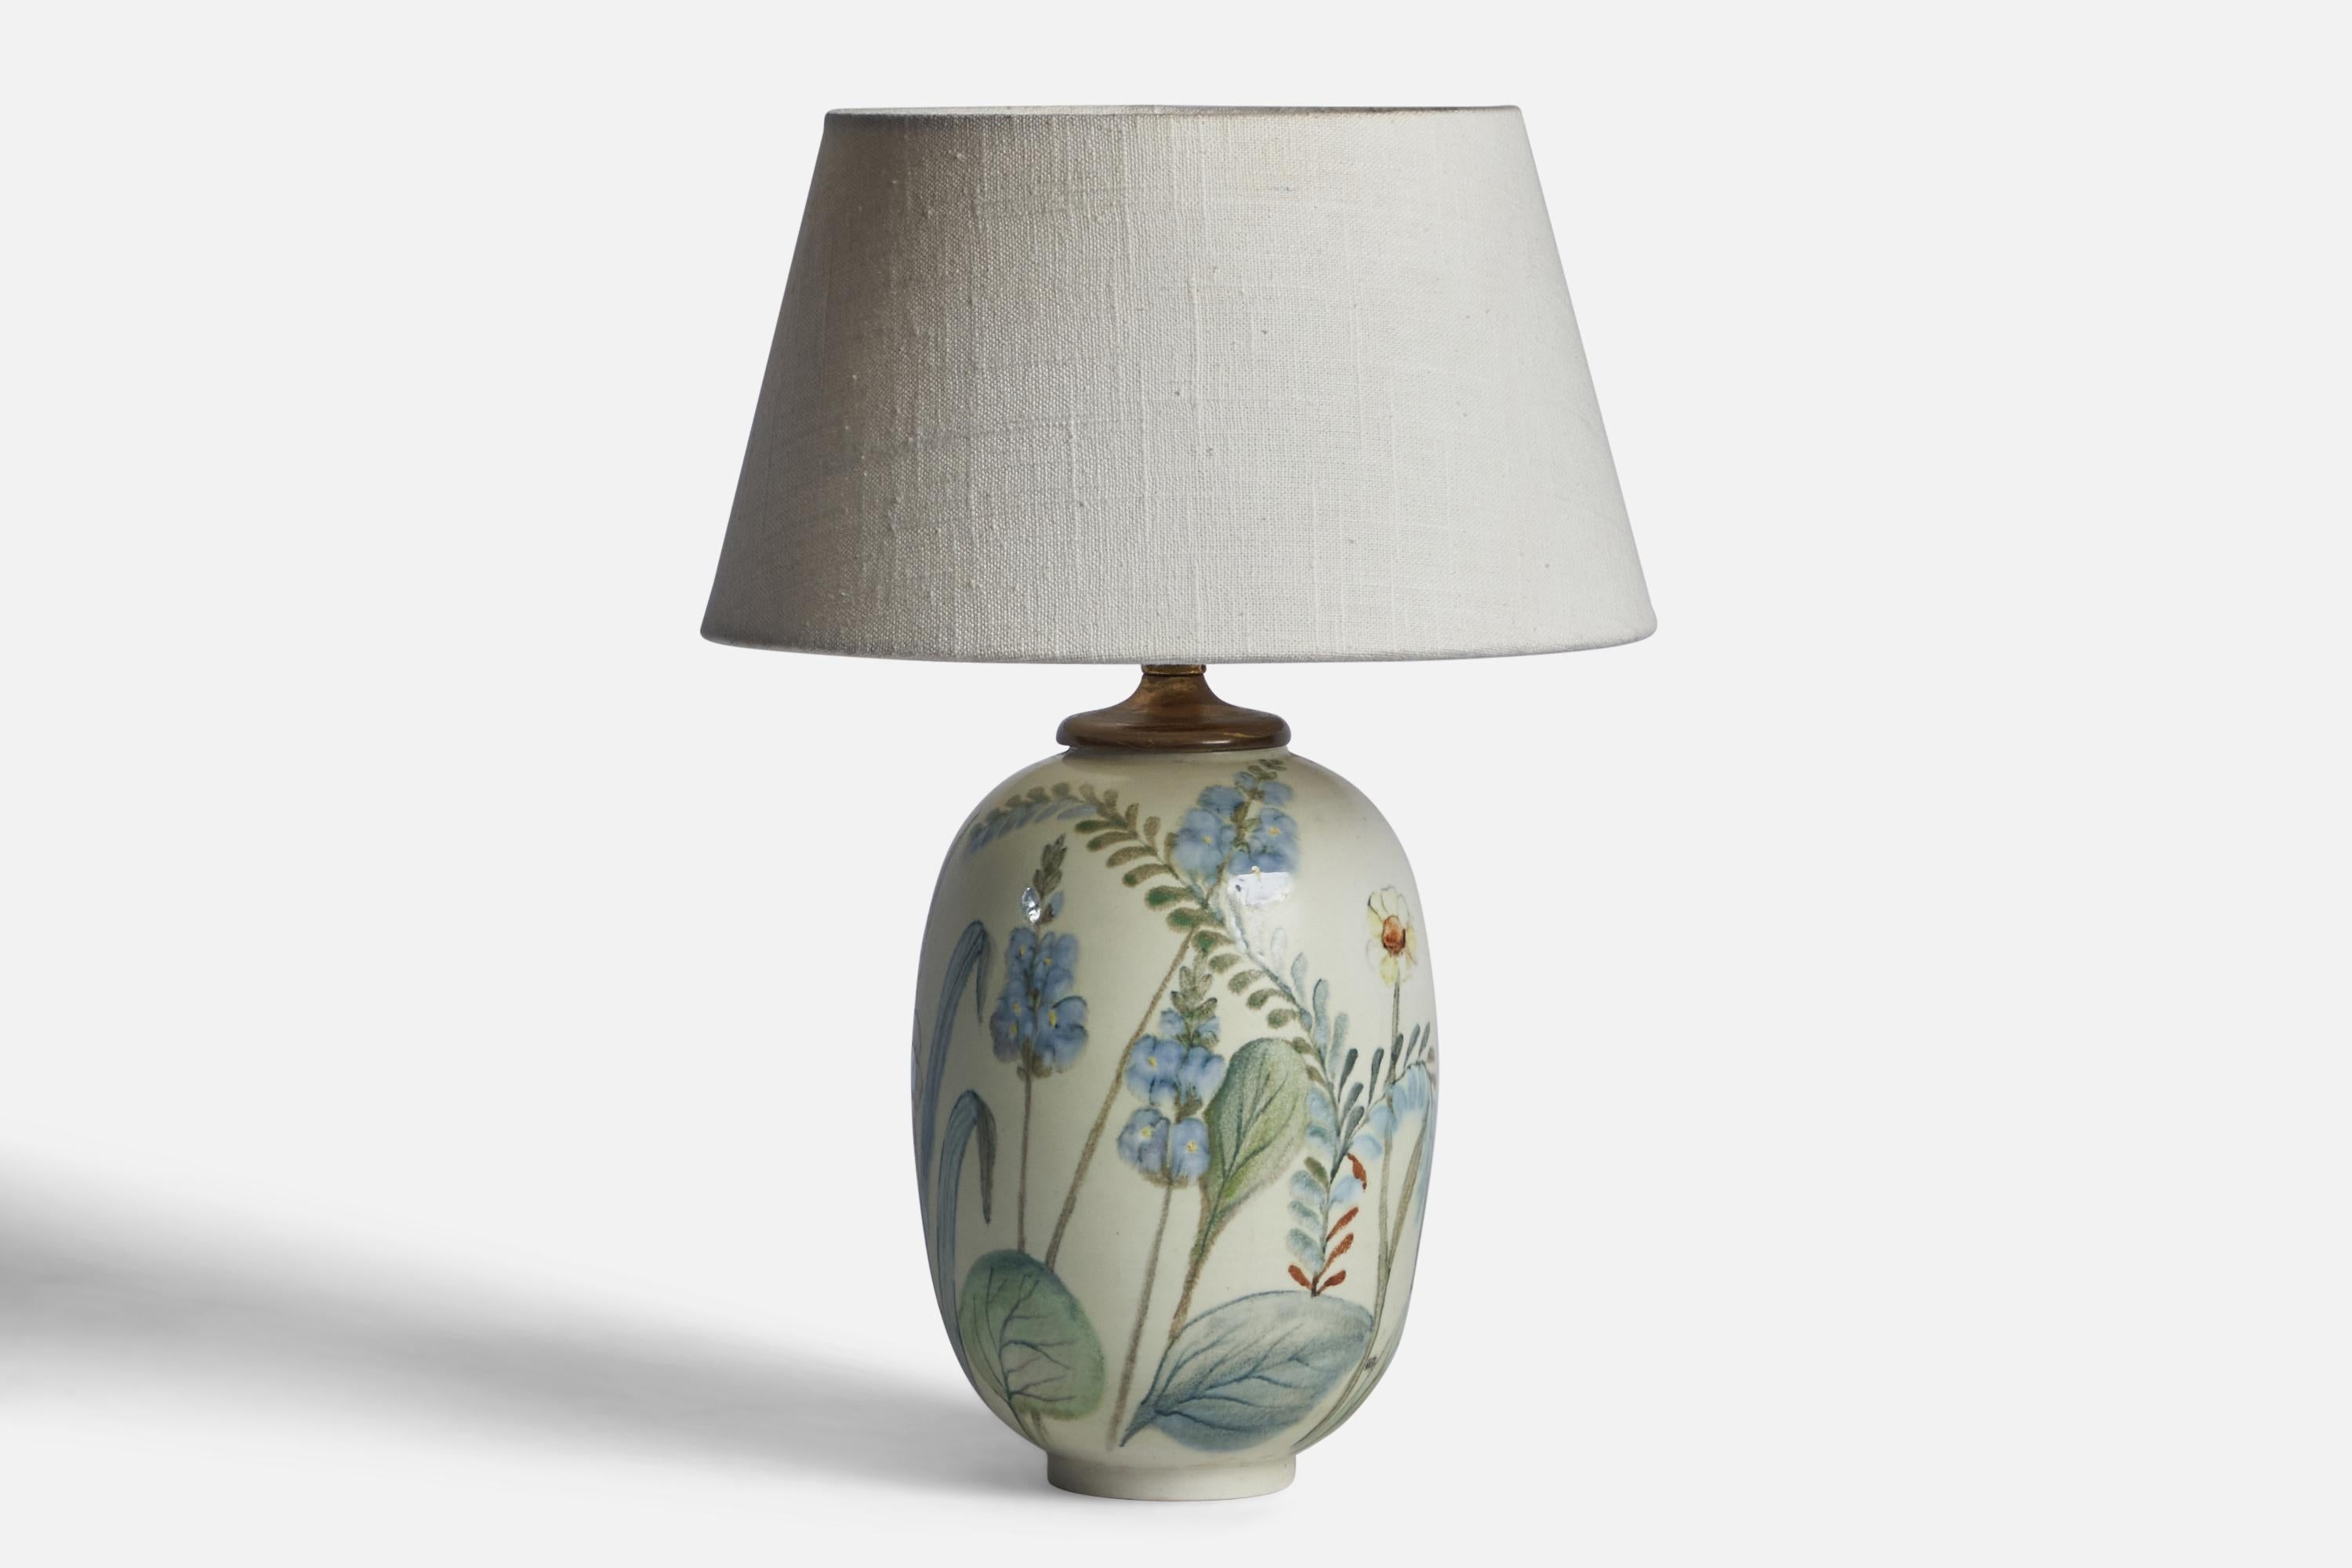 A white-glazed and hand-painted stoneware table lamp designed by Carl-Harry Stålhane and produced by Rörstrand, Sweden, 1950s.

Dimensions of Lamp (inches): 11.5” H x 5.45” Diameter
Dimensions of Shade (inches): 7” Top Diameter x 10” Bottom Diameter